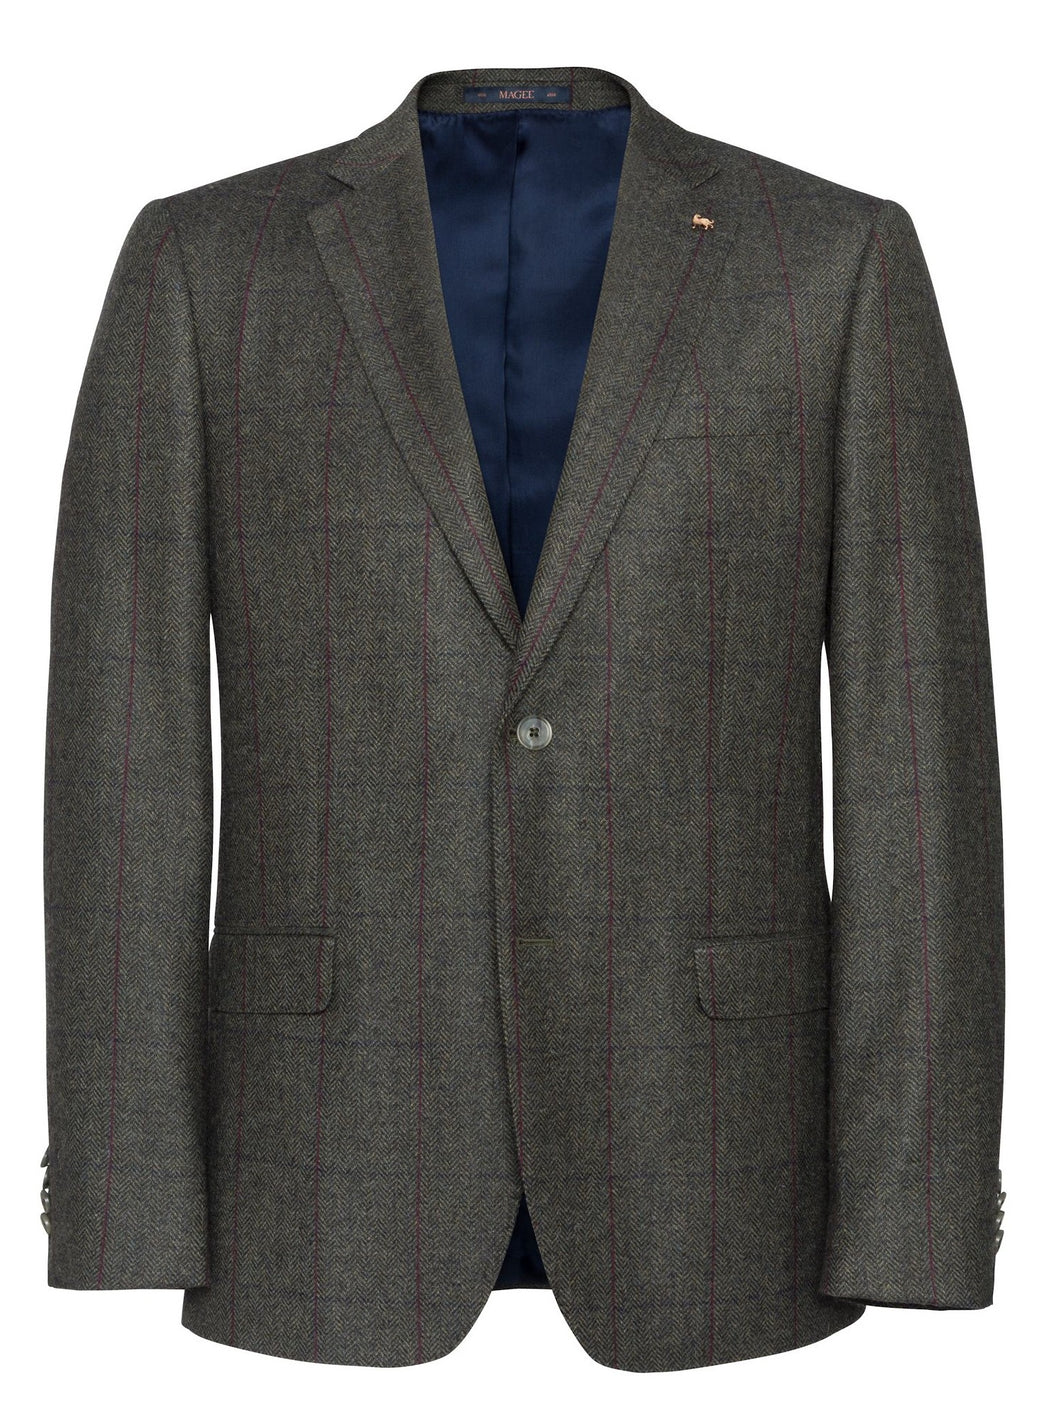 MAGEE Donegal Tweed Jacket - Mens Clady - Green With Navy & Plum Overcheck